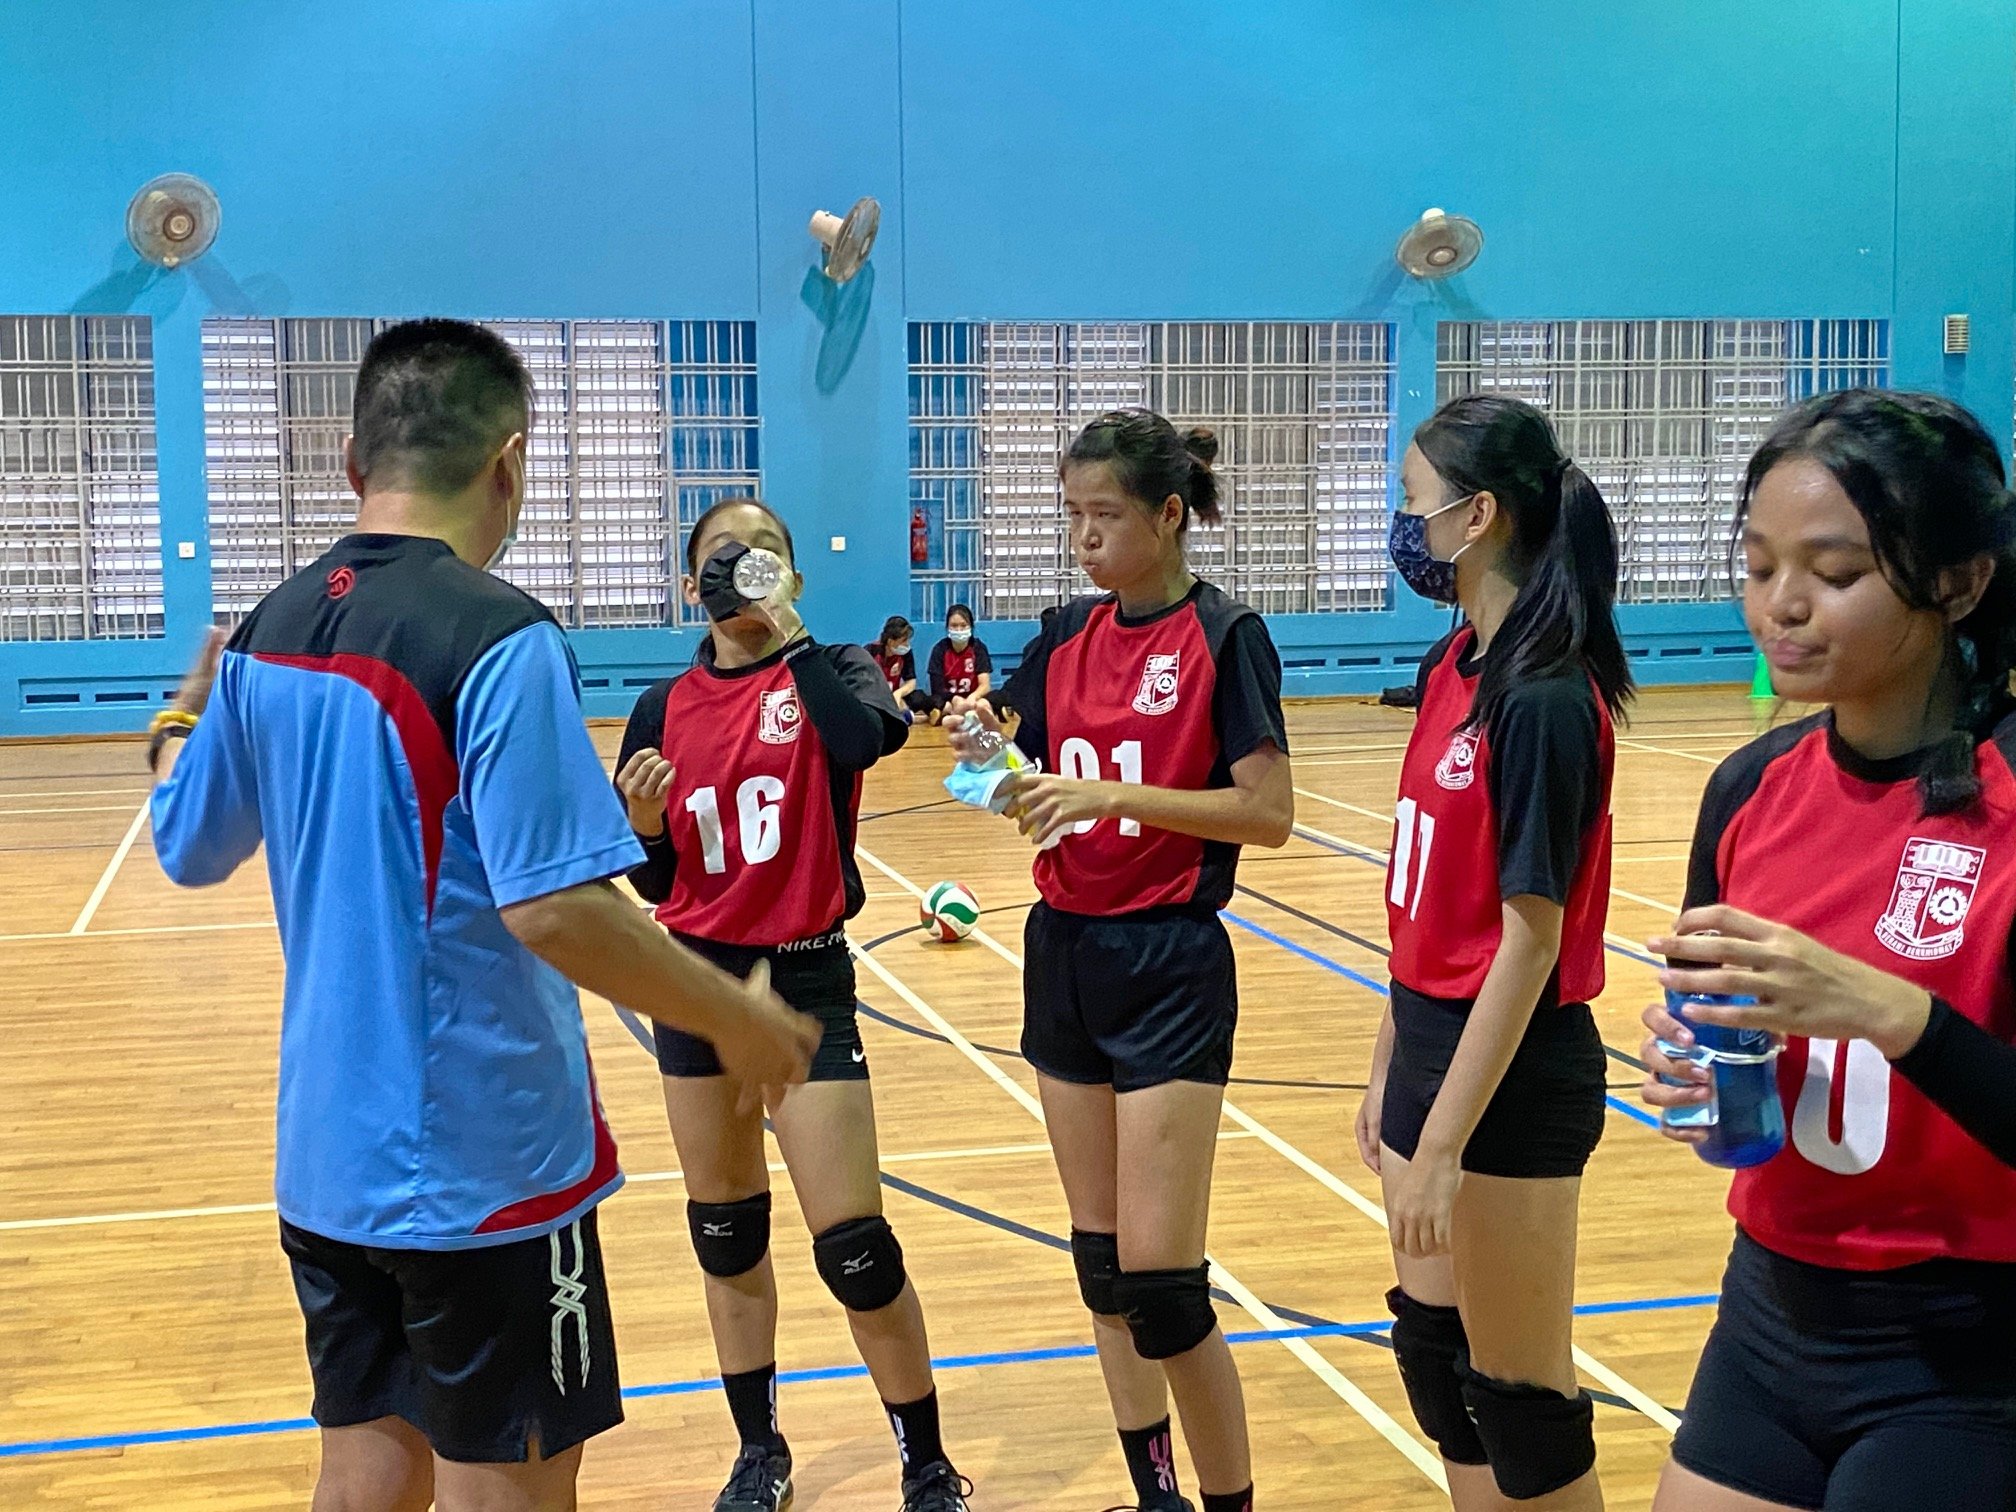 NSG South Zone B Div girls volleyball final - Queenstown (red) v Queensway (purple) 3-1